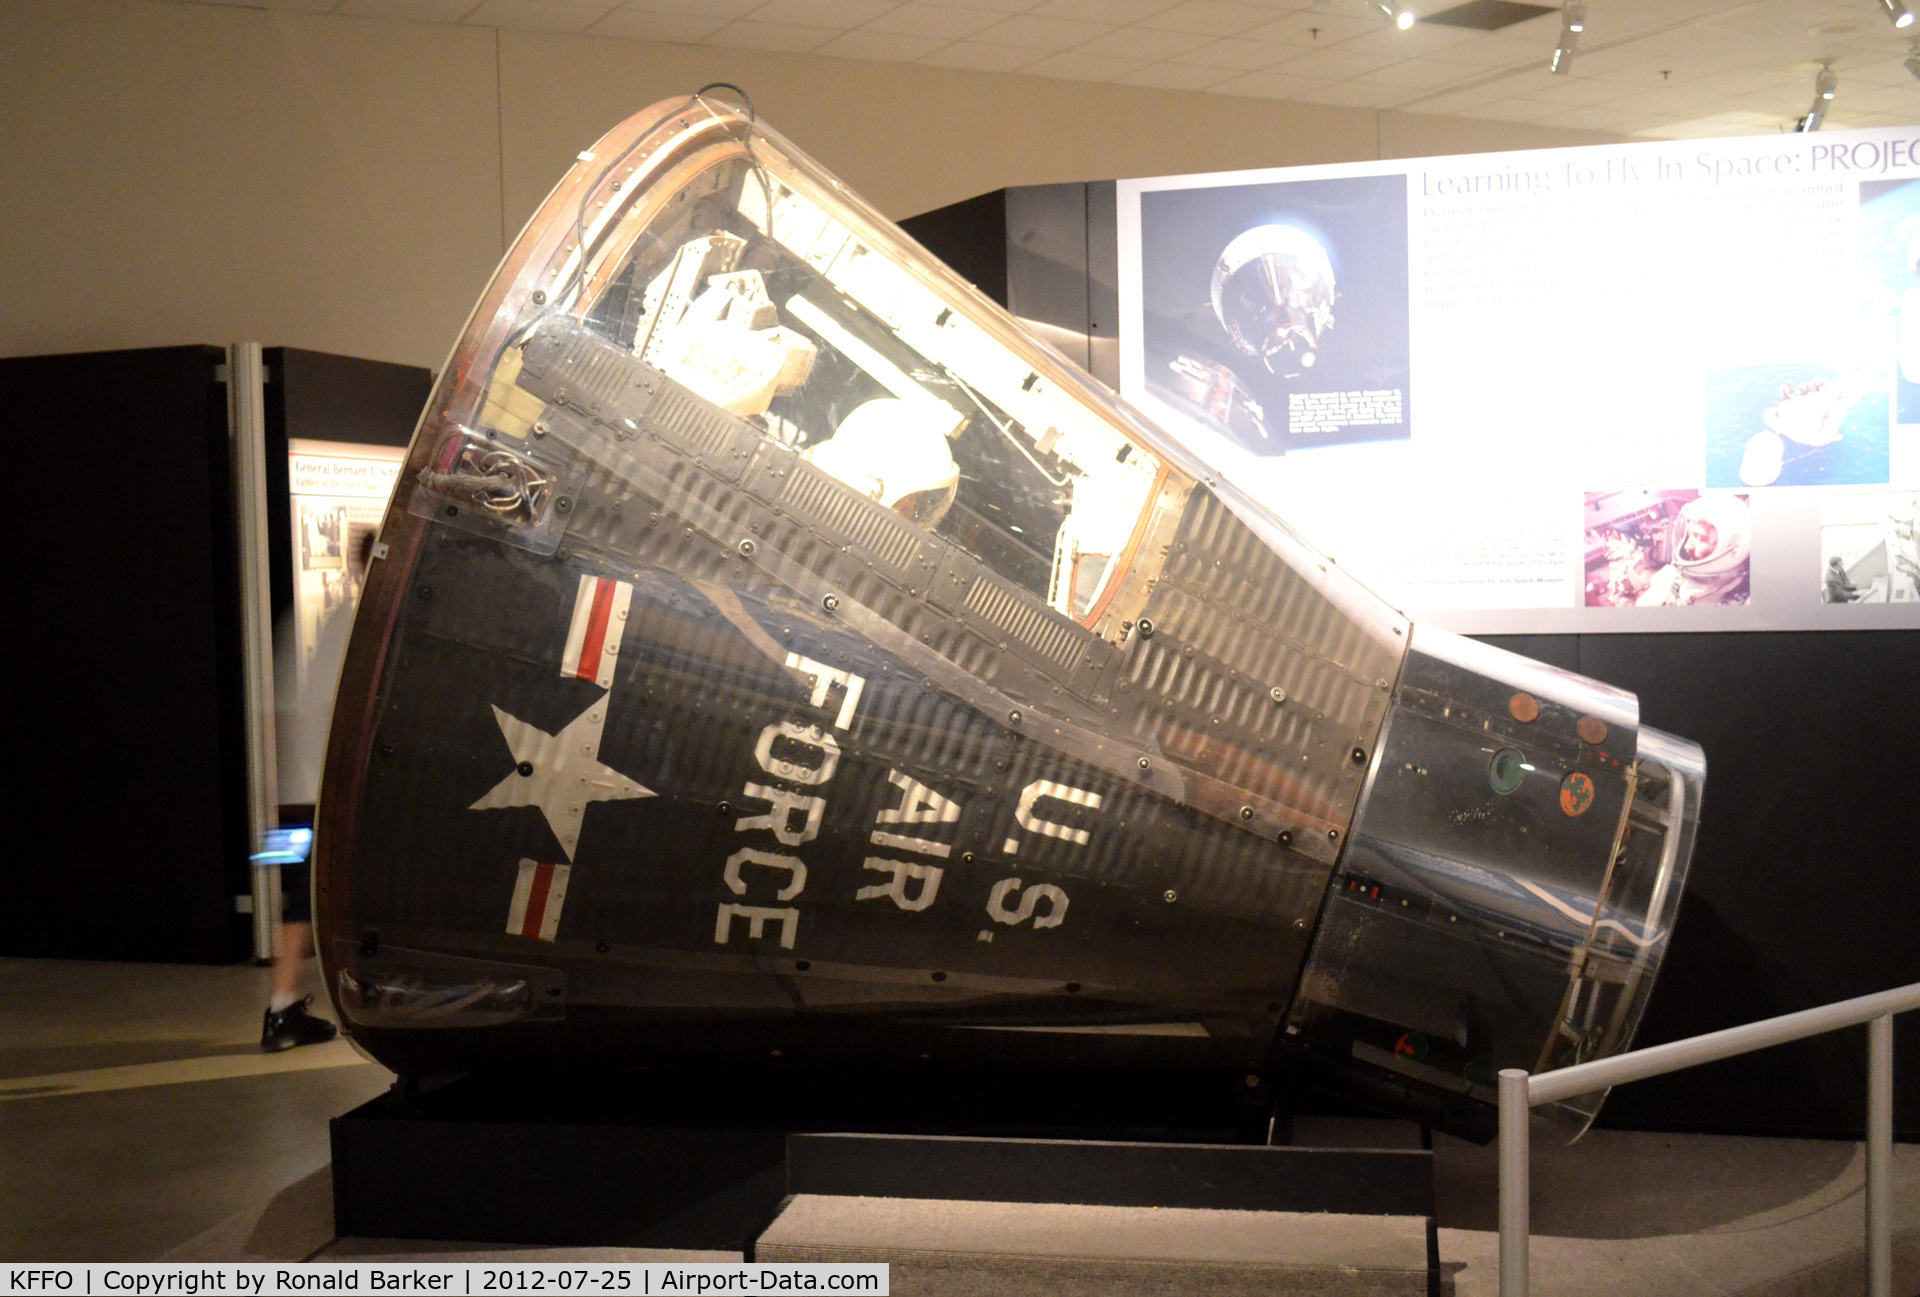 Wright-patterson Afb Airport (FFO) - Gemini capsule at the AF Museum